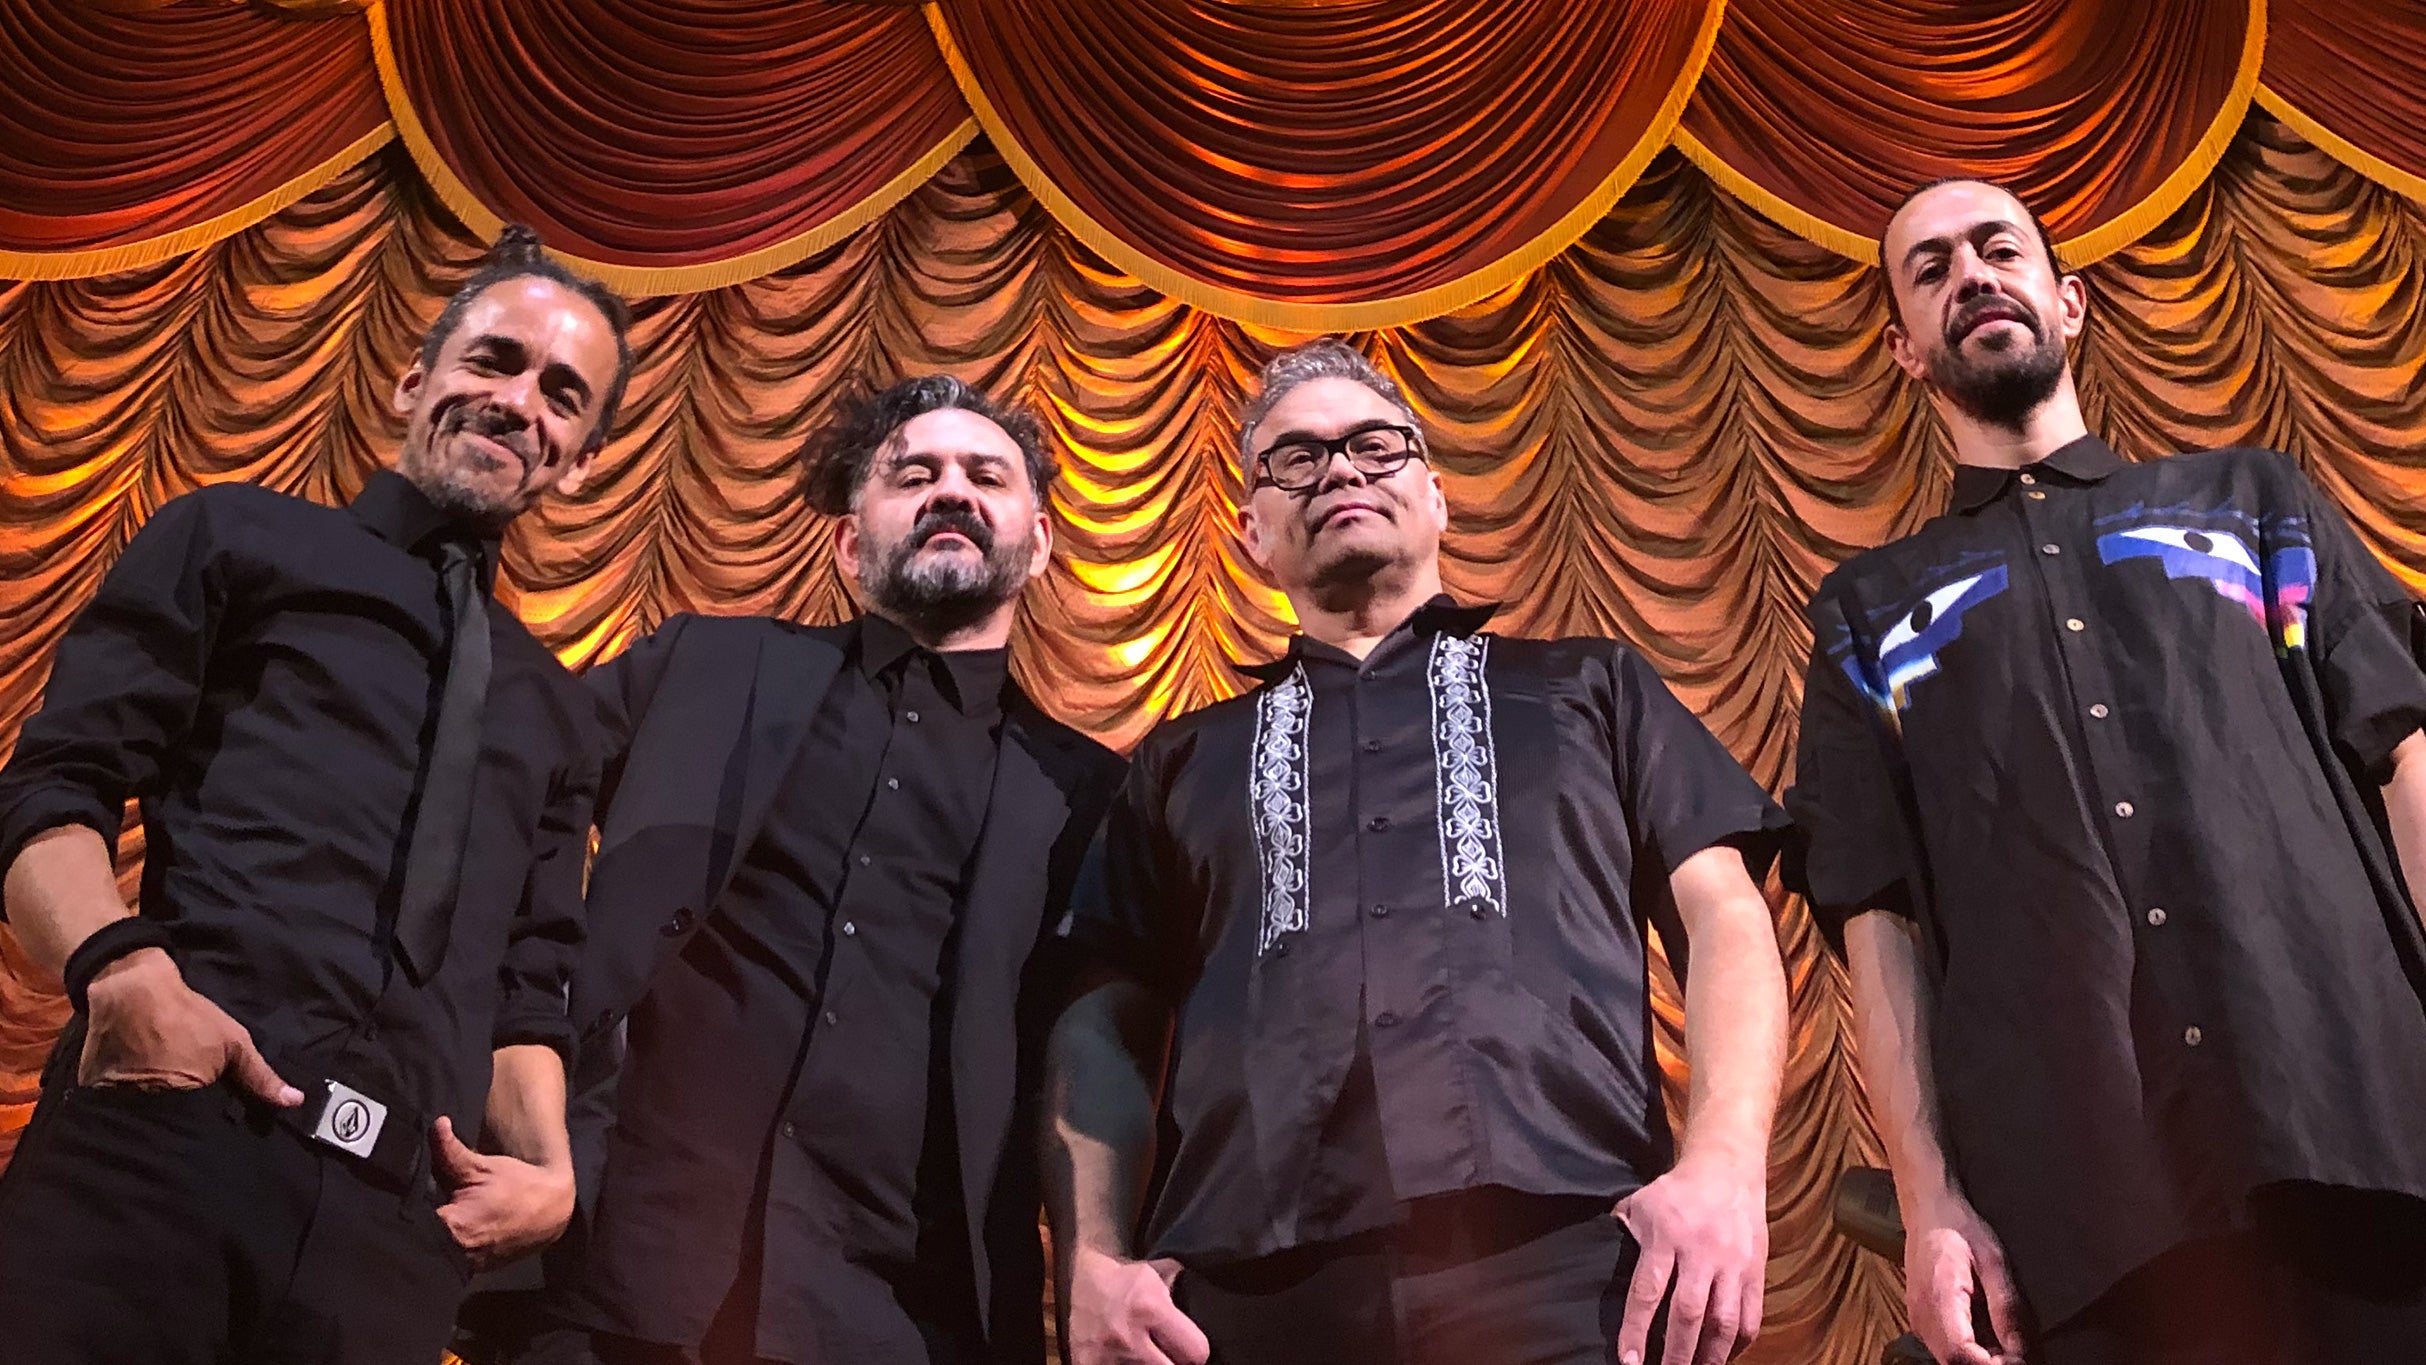 Café Tacvba - US Tour 2023 in Wheatland promo photo for VIP Package Onsale presale offer code